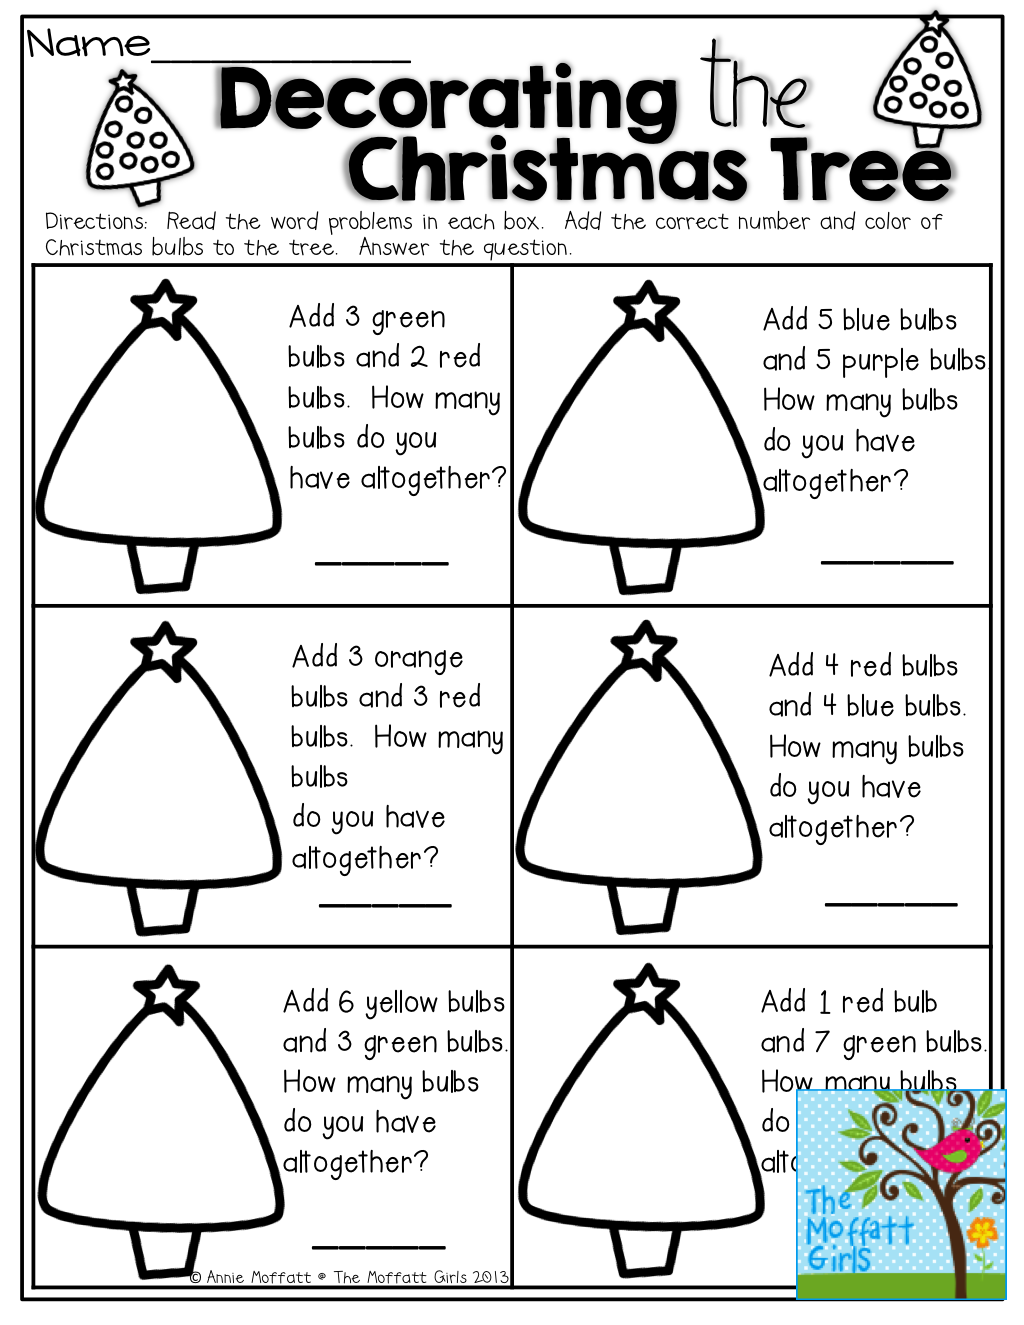 Simple WORD PROBLEMS Decorate The Christmas Tree Christmas 